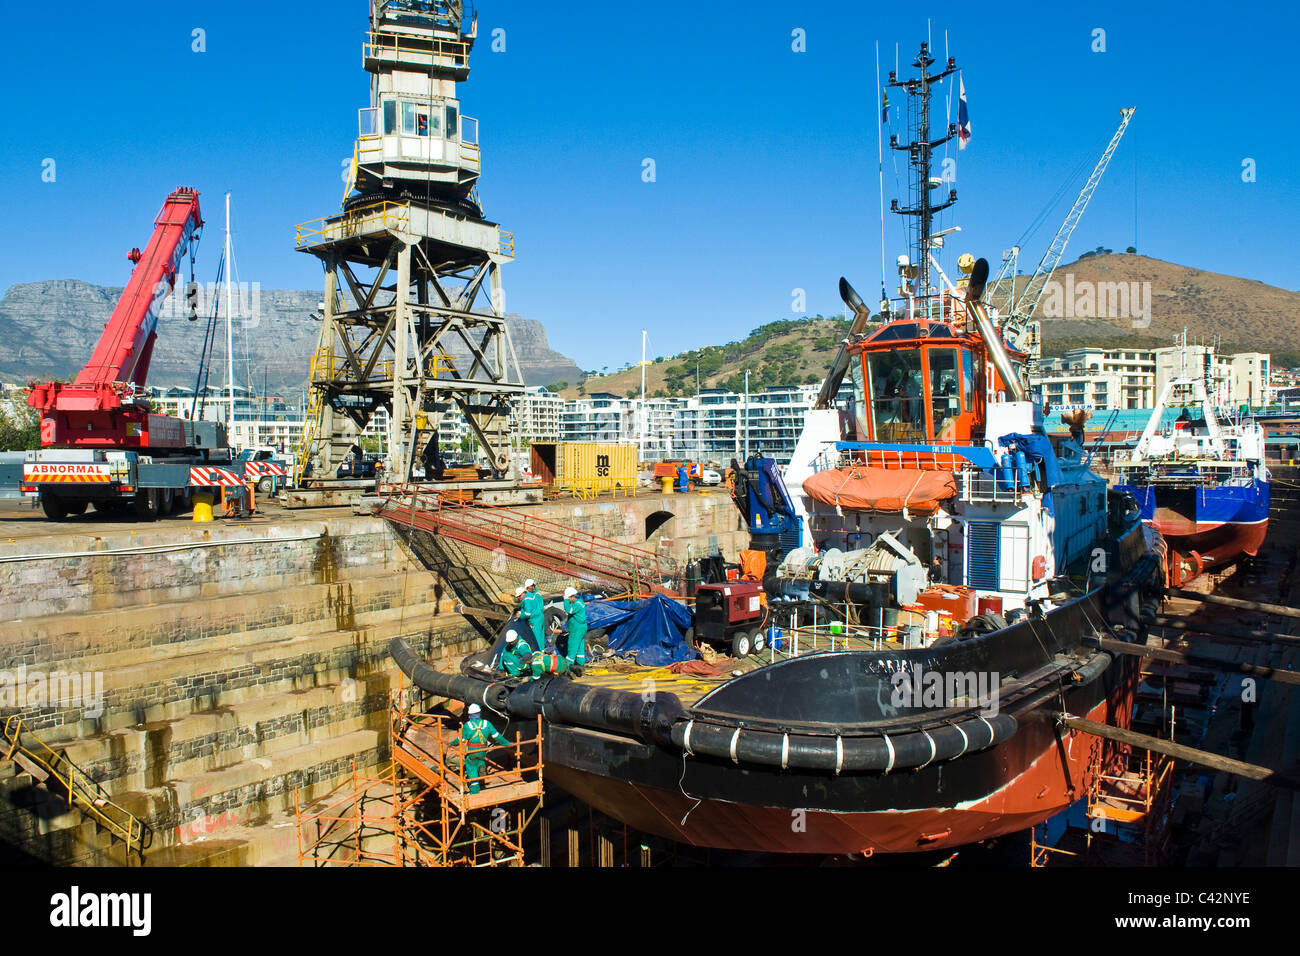 Workers repairing a tugboat in a dry dock in Cape Town South Africa Stock Photo